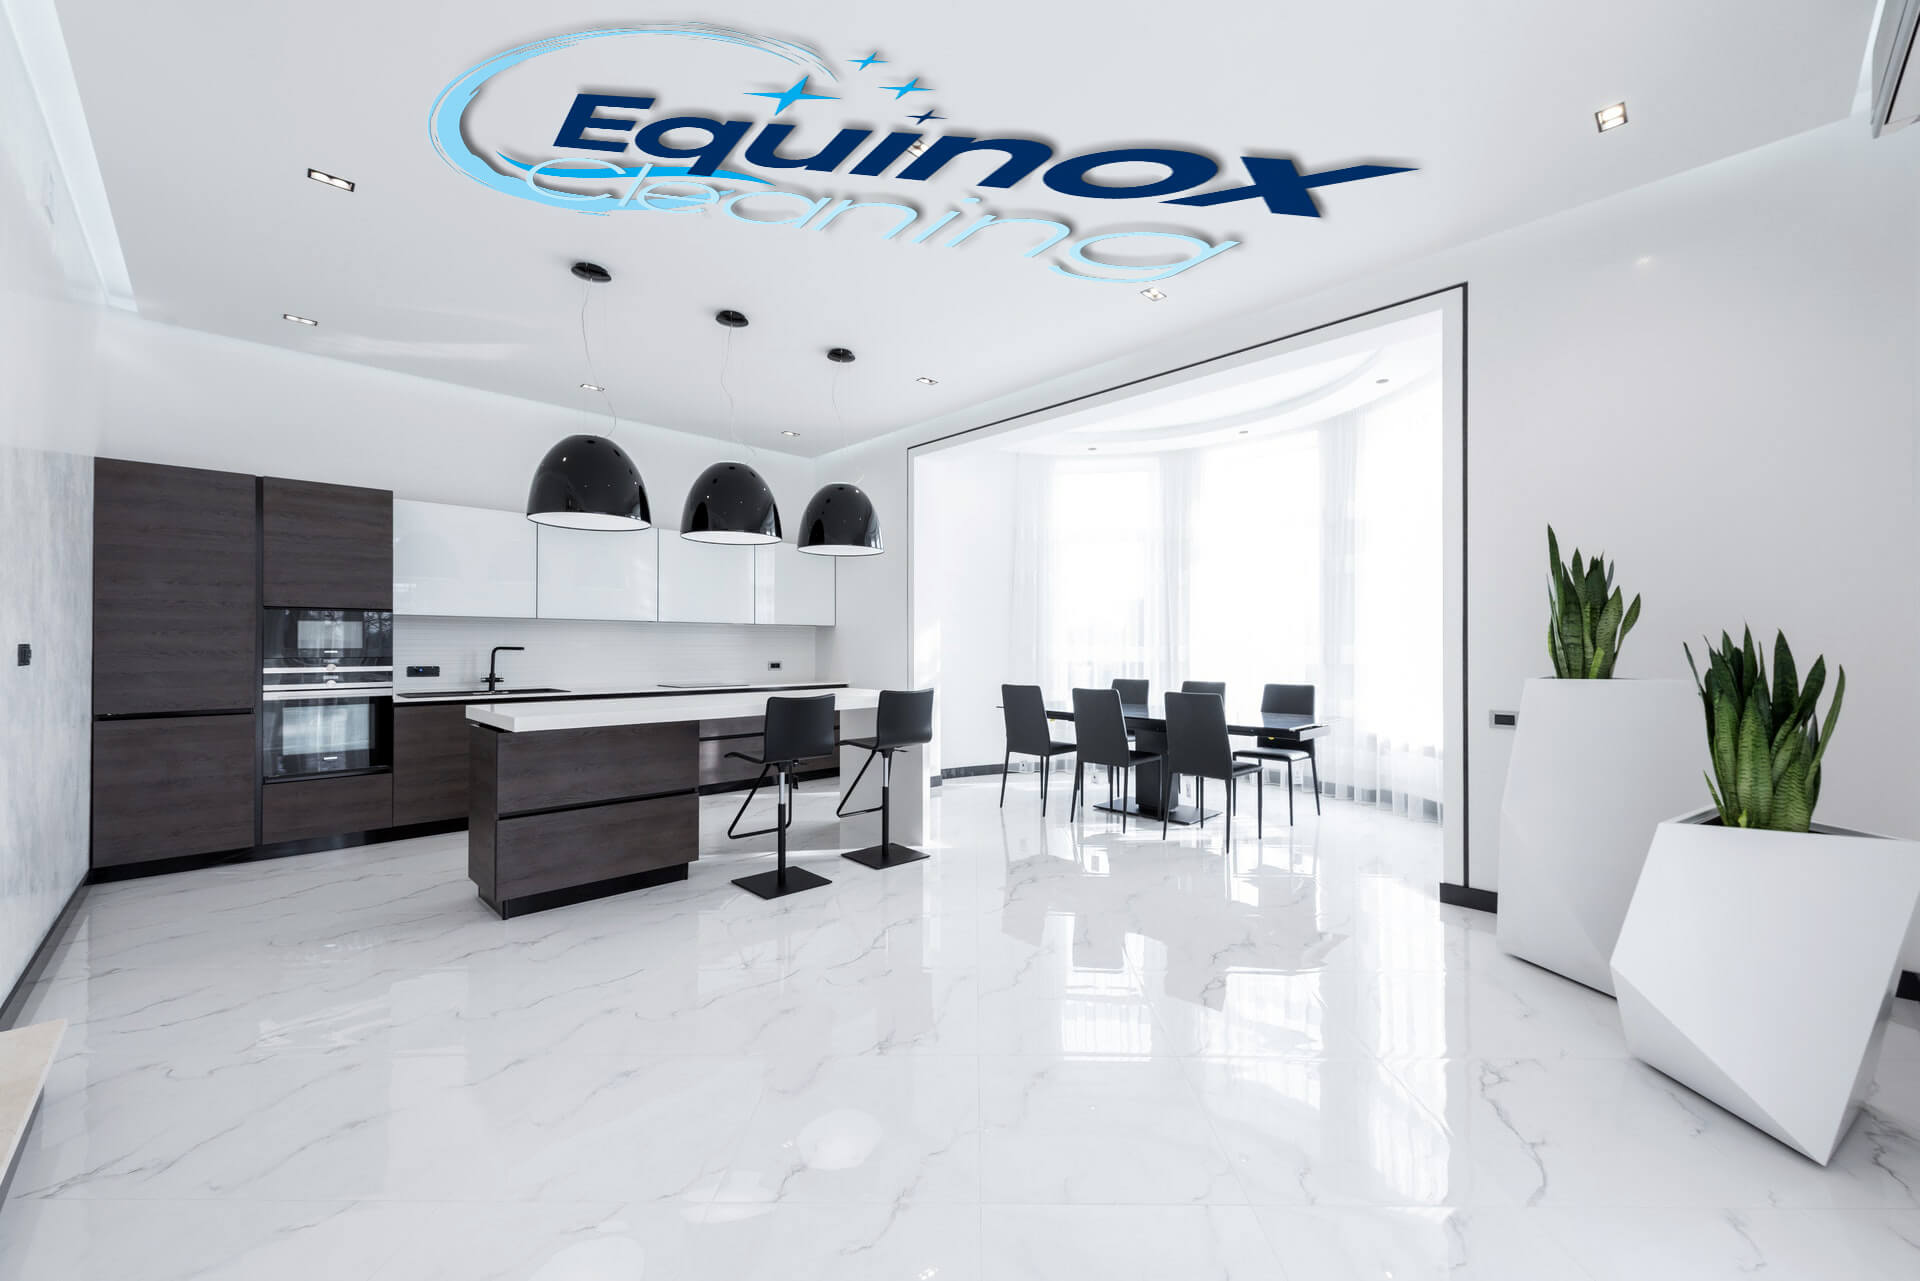 Equinox Cleaning Franchise